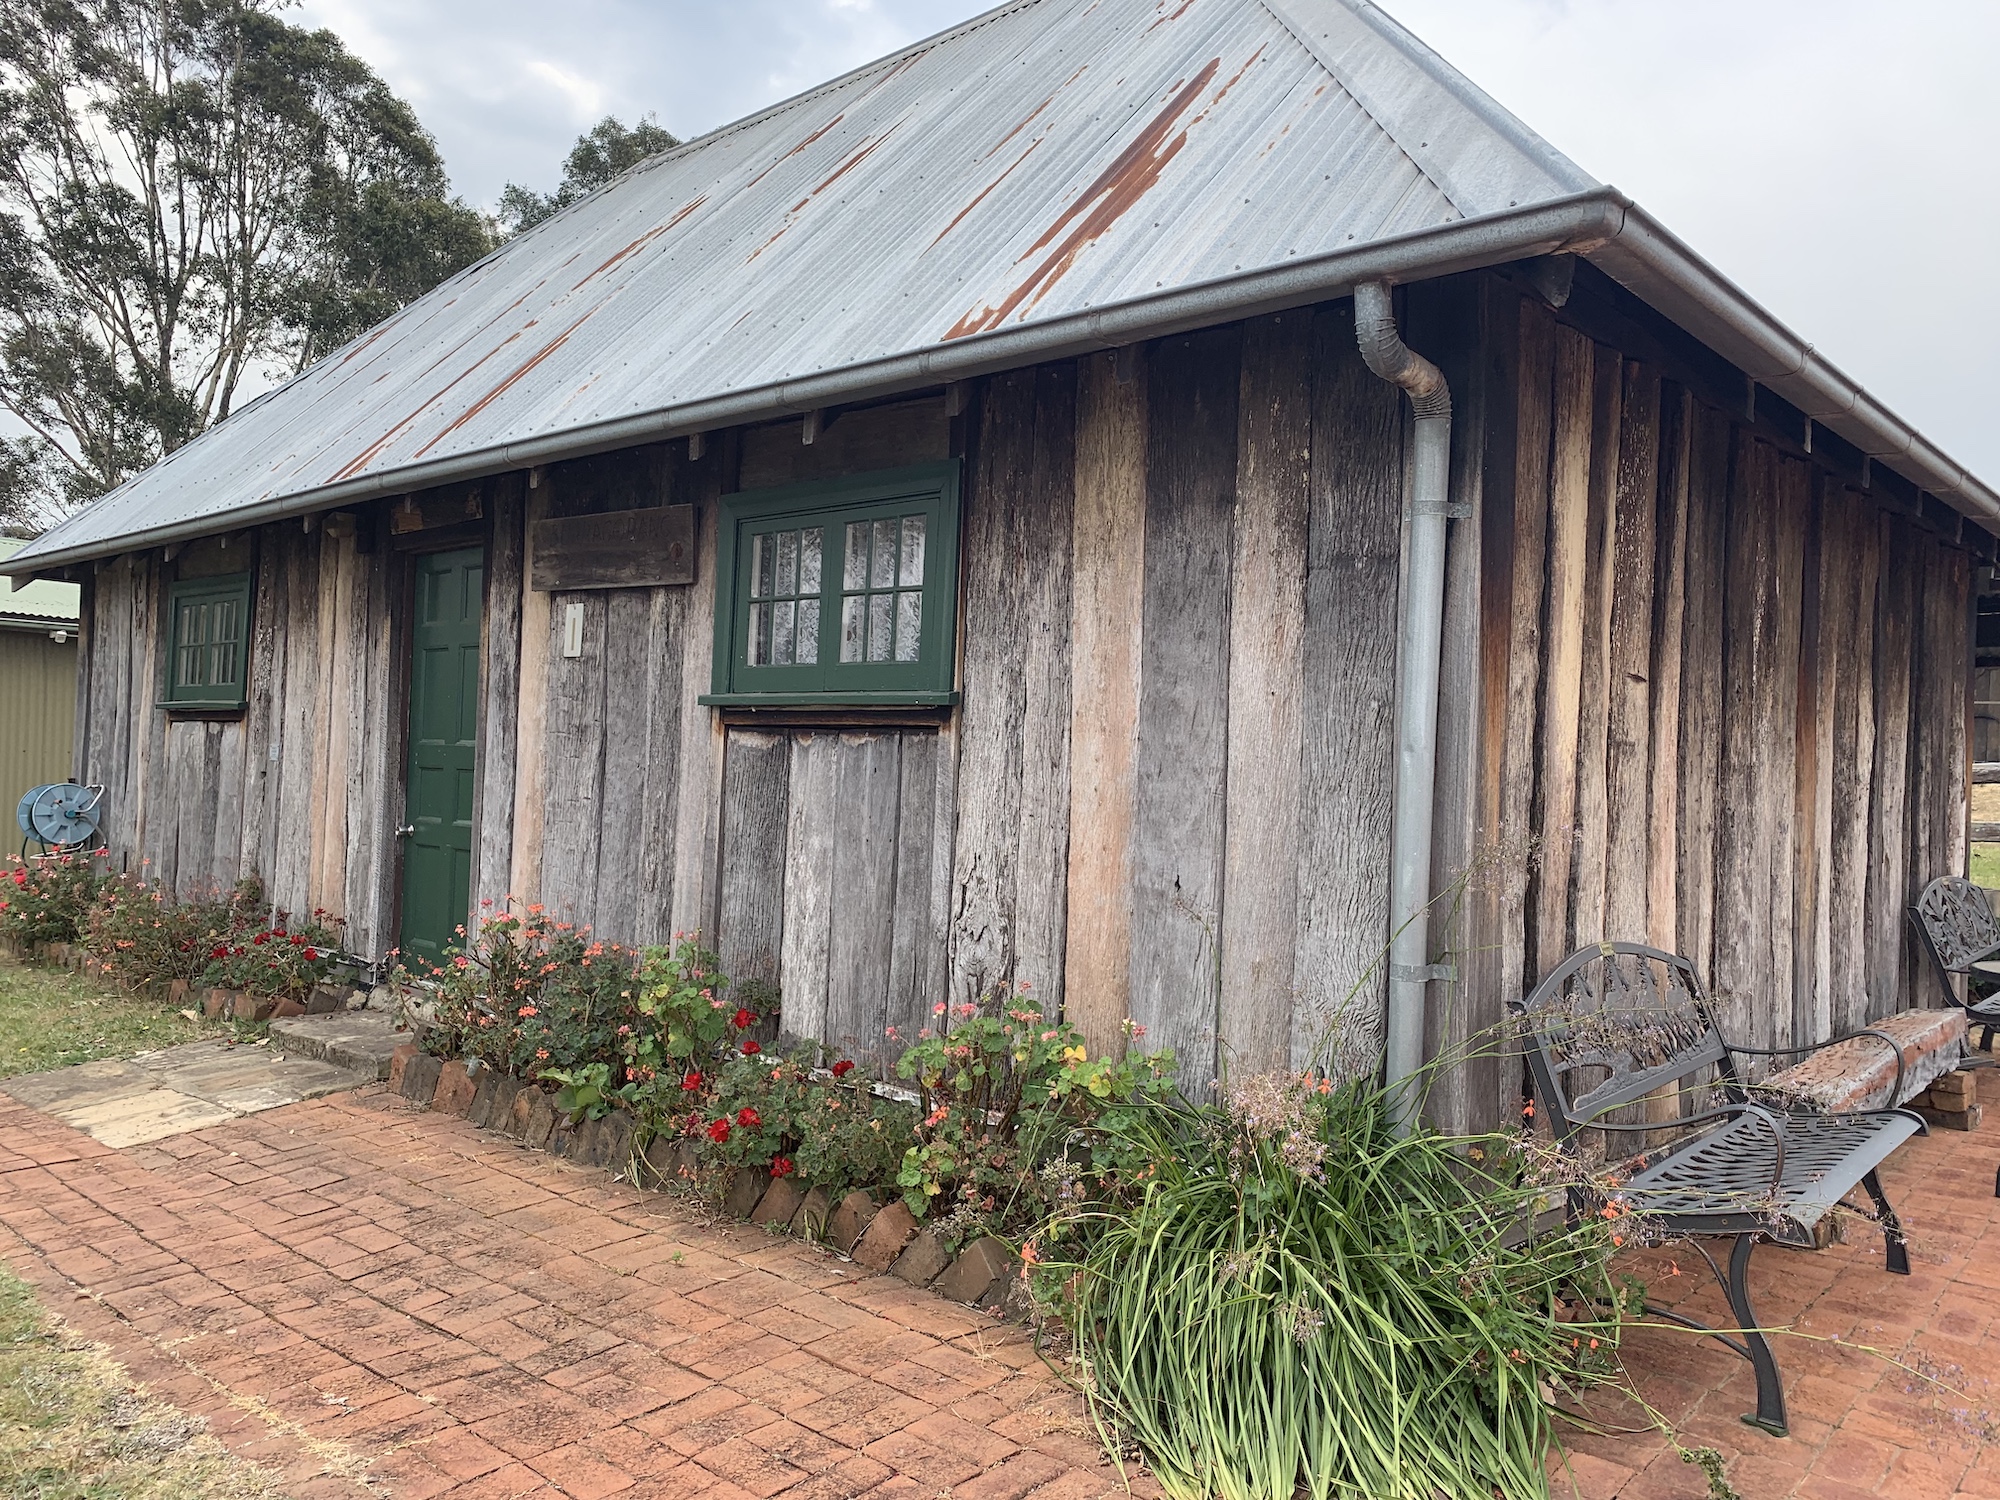 Wollondilly Heritage Centre & Museum